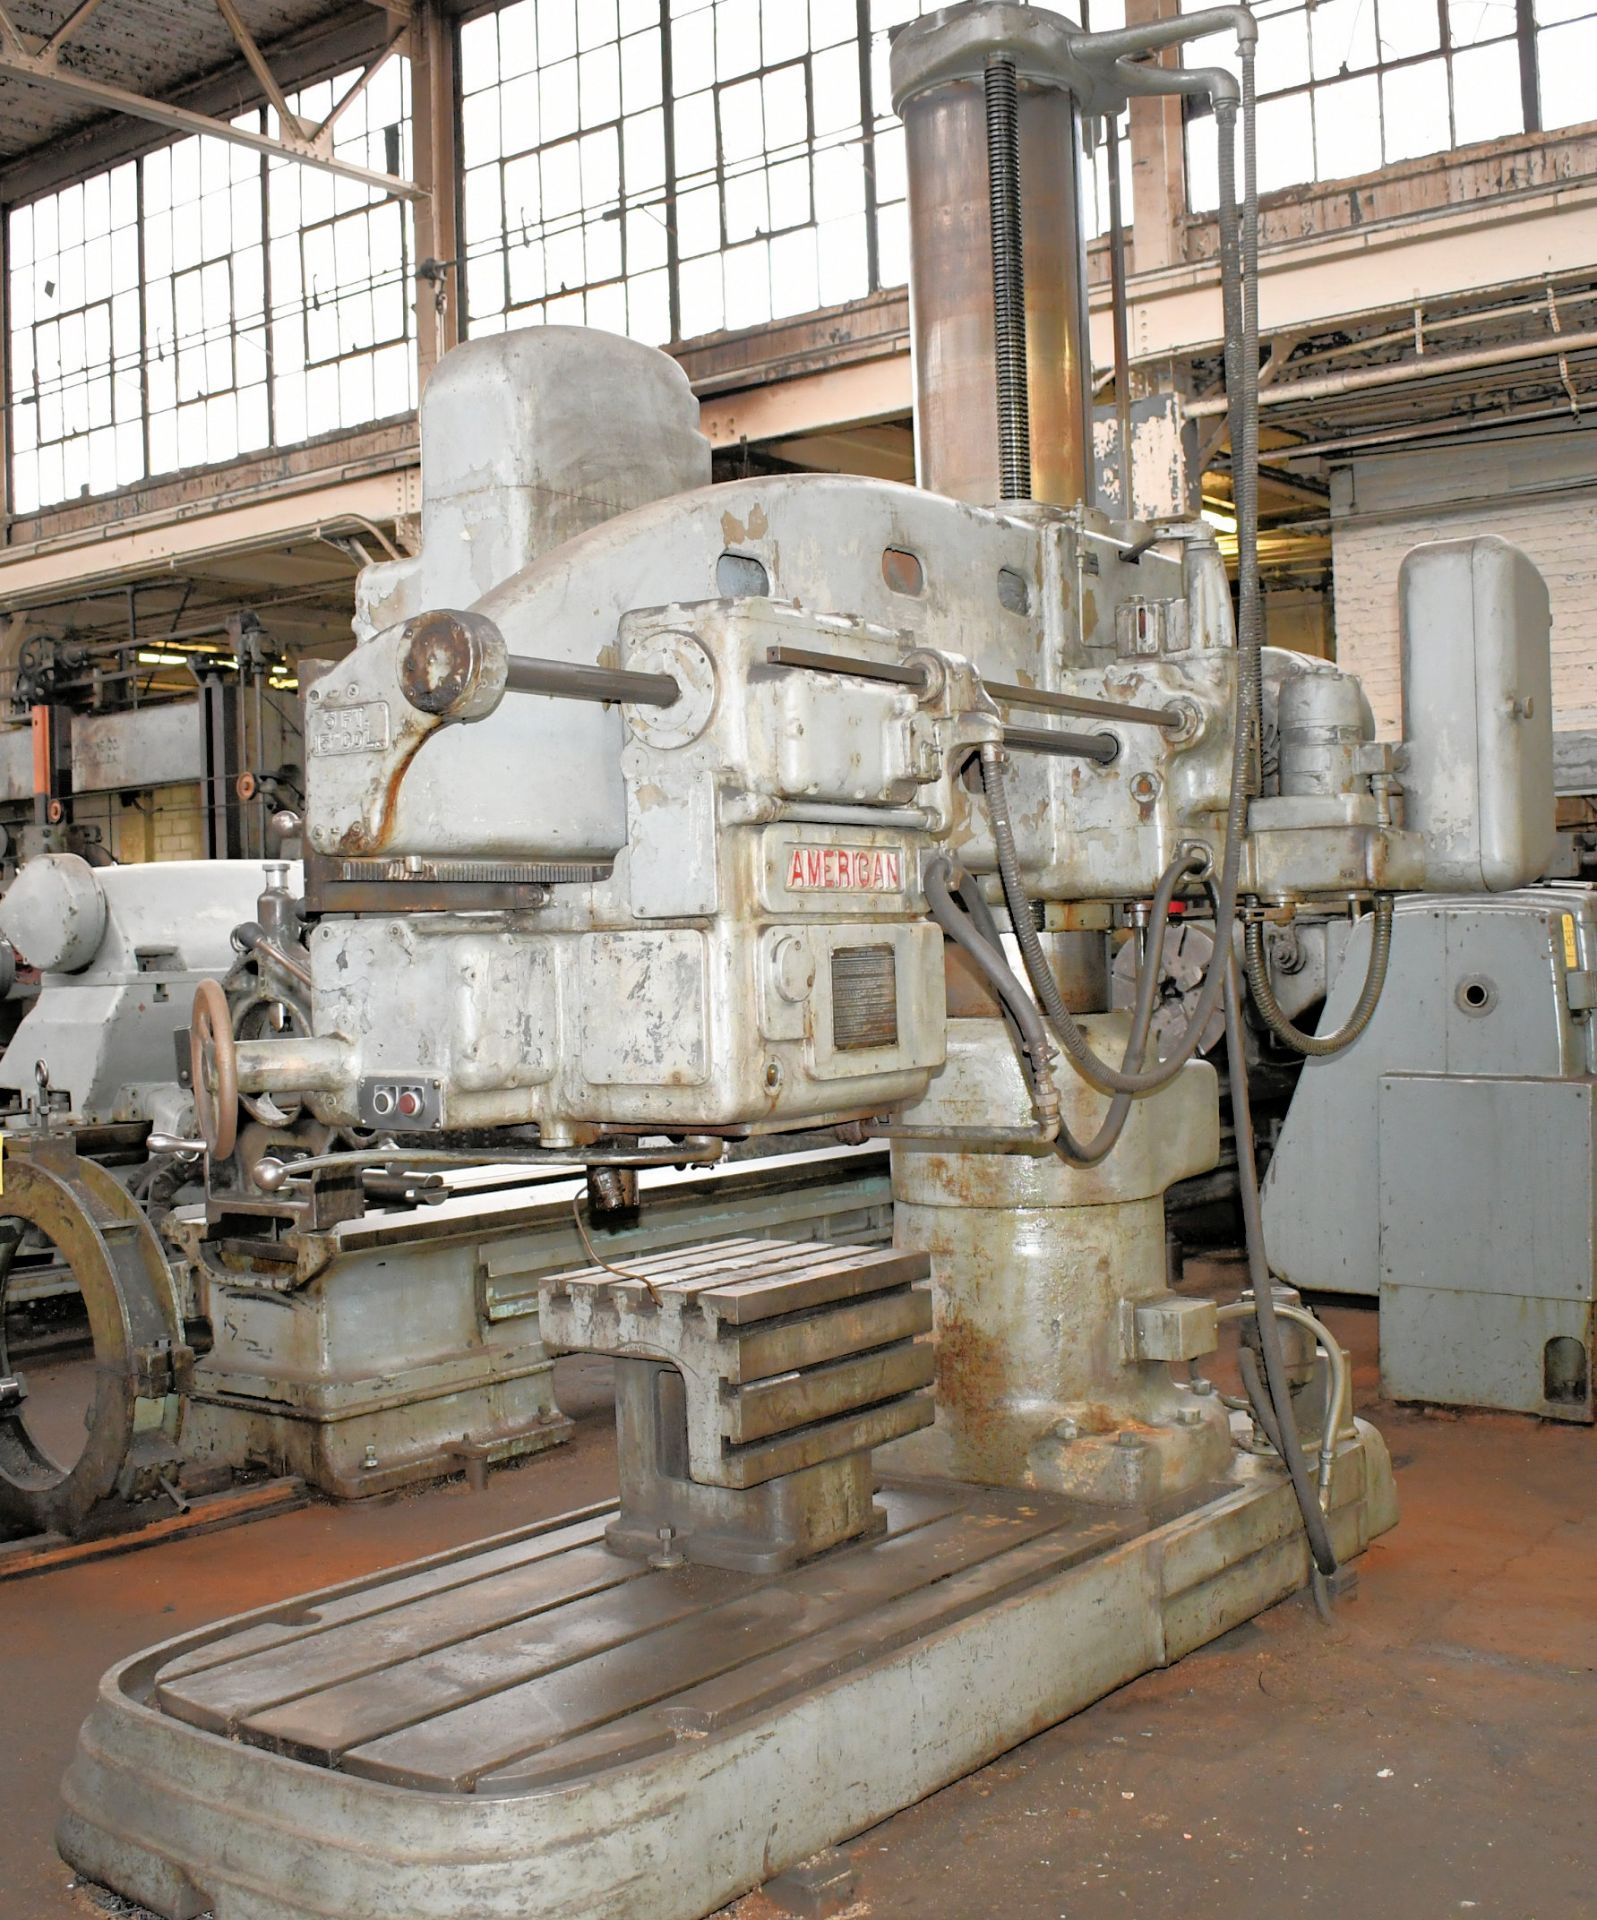 American Hole Wizard 5' Arm X 15" Column Radial Arm Drill, S/N 73055, 18" X 24" Box Table - Image 2 of 6